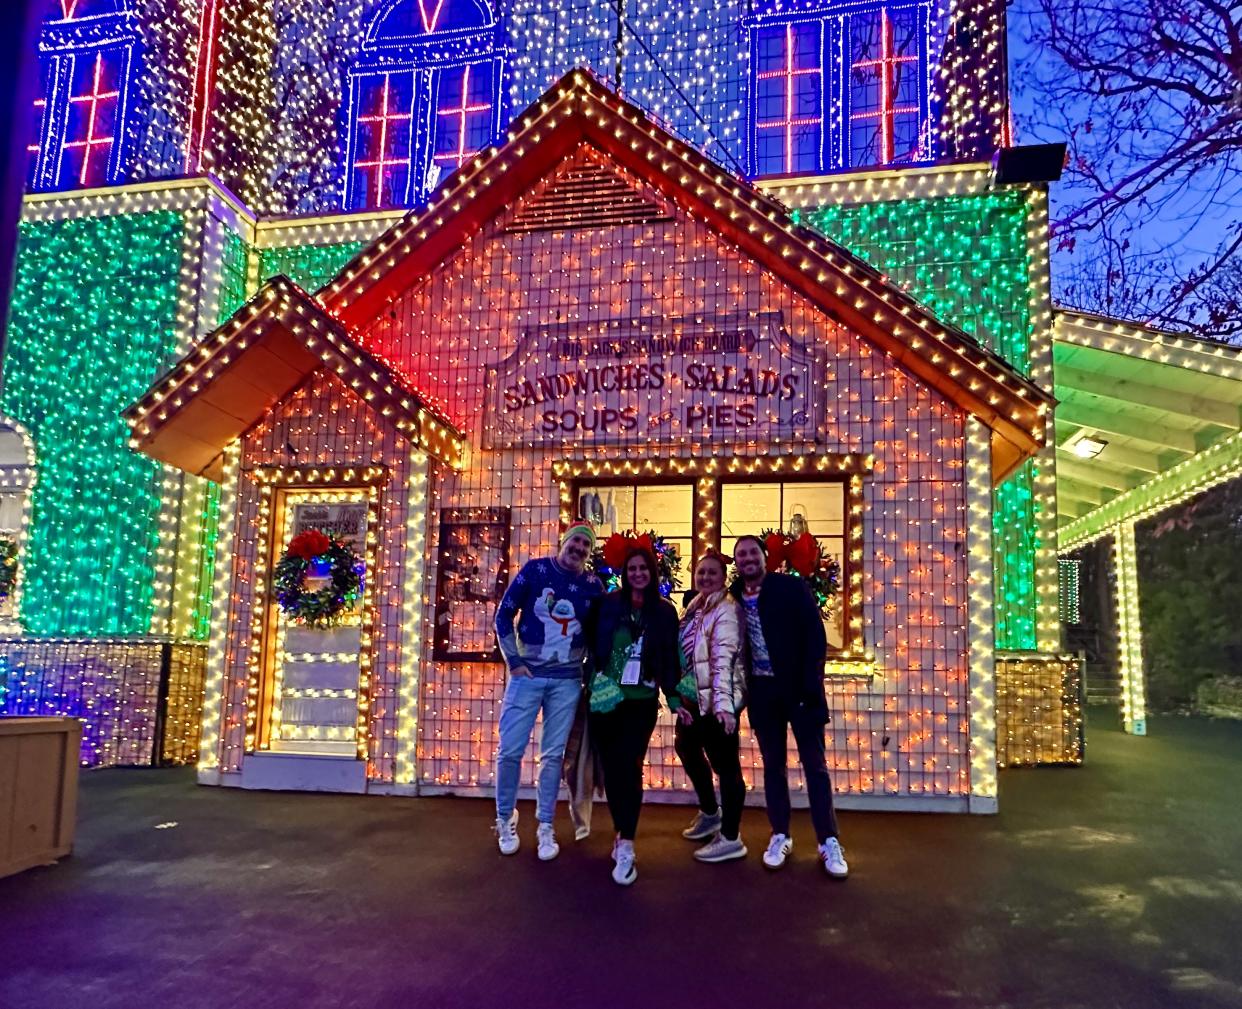 Millions and millions of lights cover Branson, Mo. theme park Silver Dollar City during the holiday season. (Photo: Carly Caramanna)